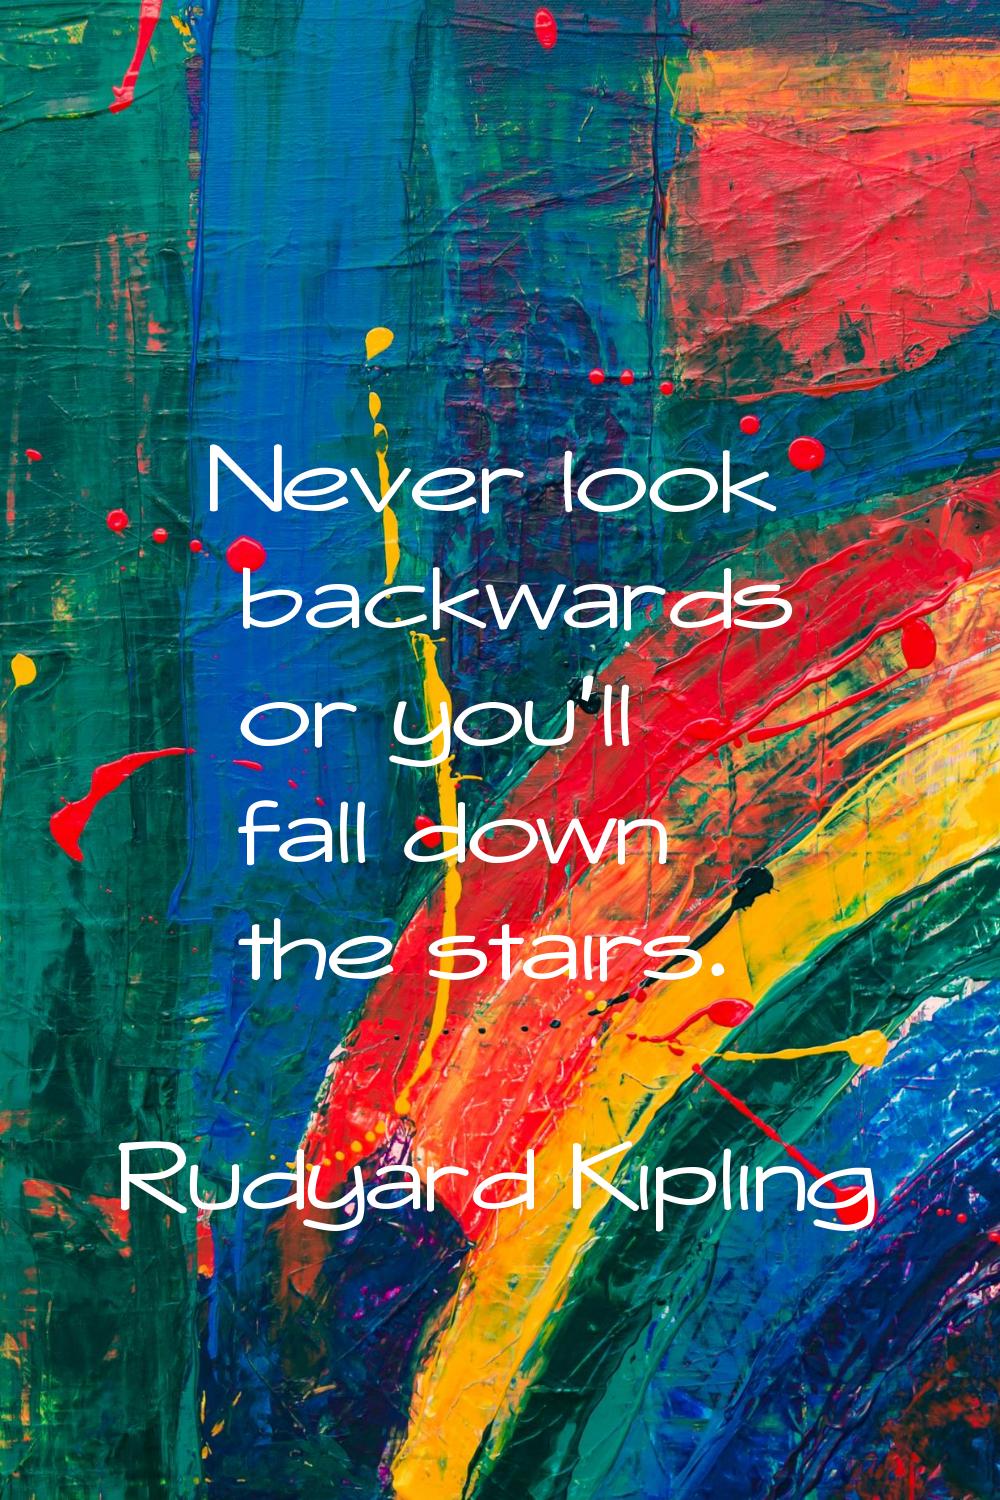 Never look backwards or you'll fall down the stairs.